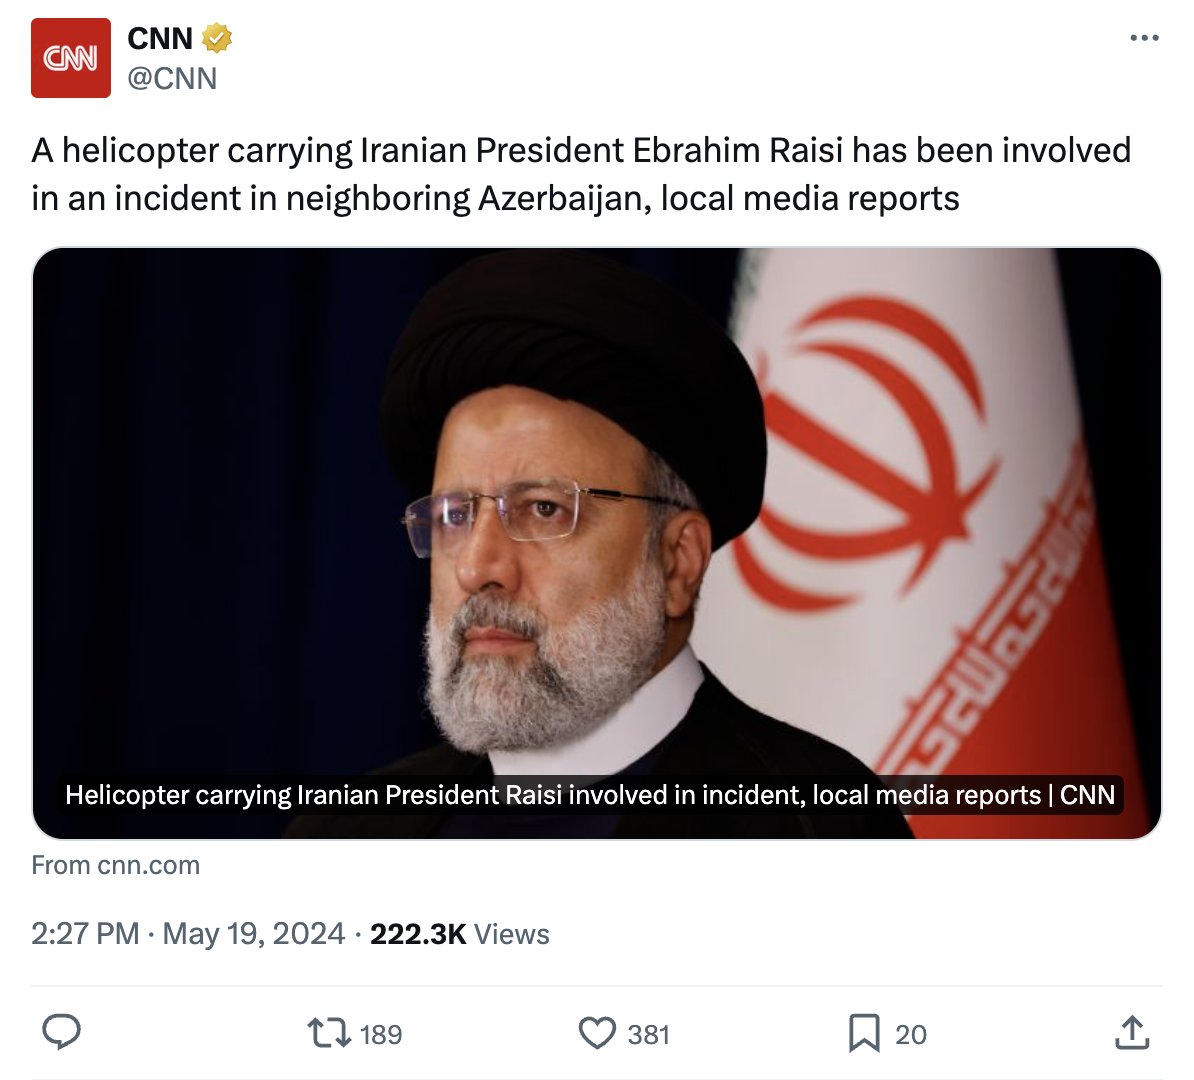 Iranian President Ebrahim Raisi's helicopter did not crash in the country of Azerbaijan, as this CNN tweet suggests. The accident happened in the Iranian province of East Azarbaijan.